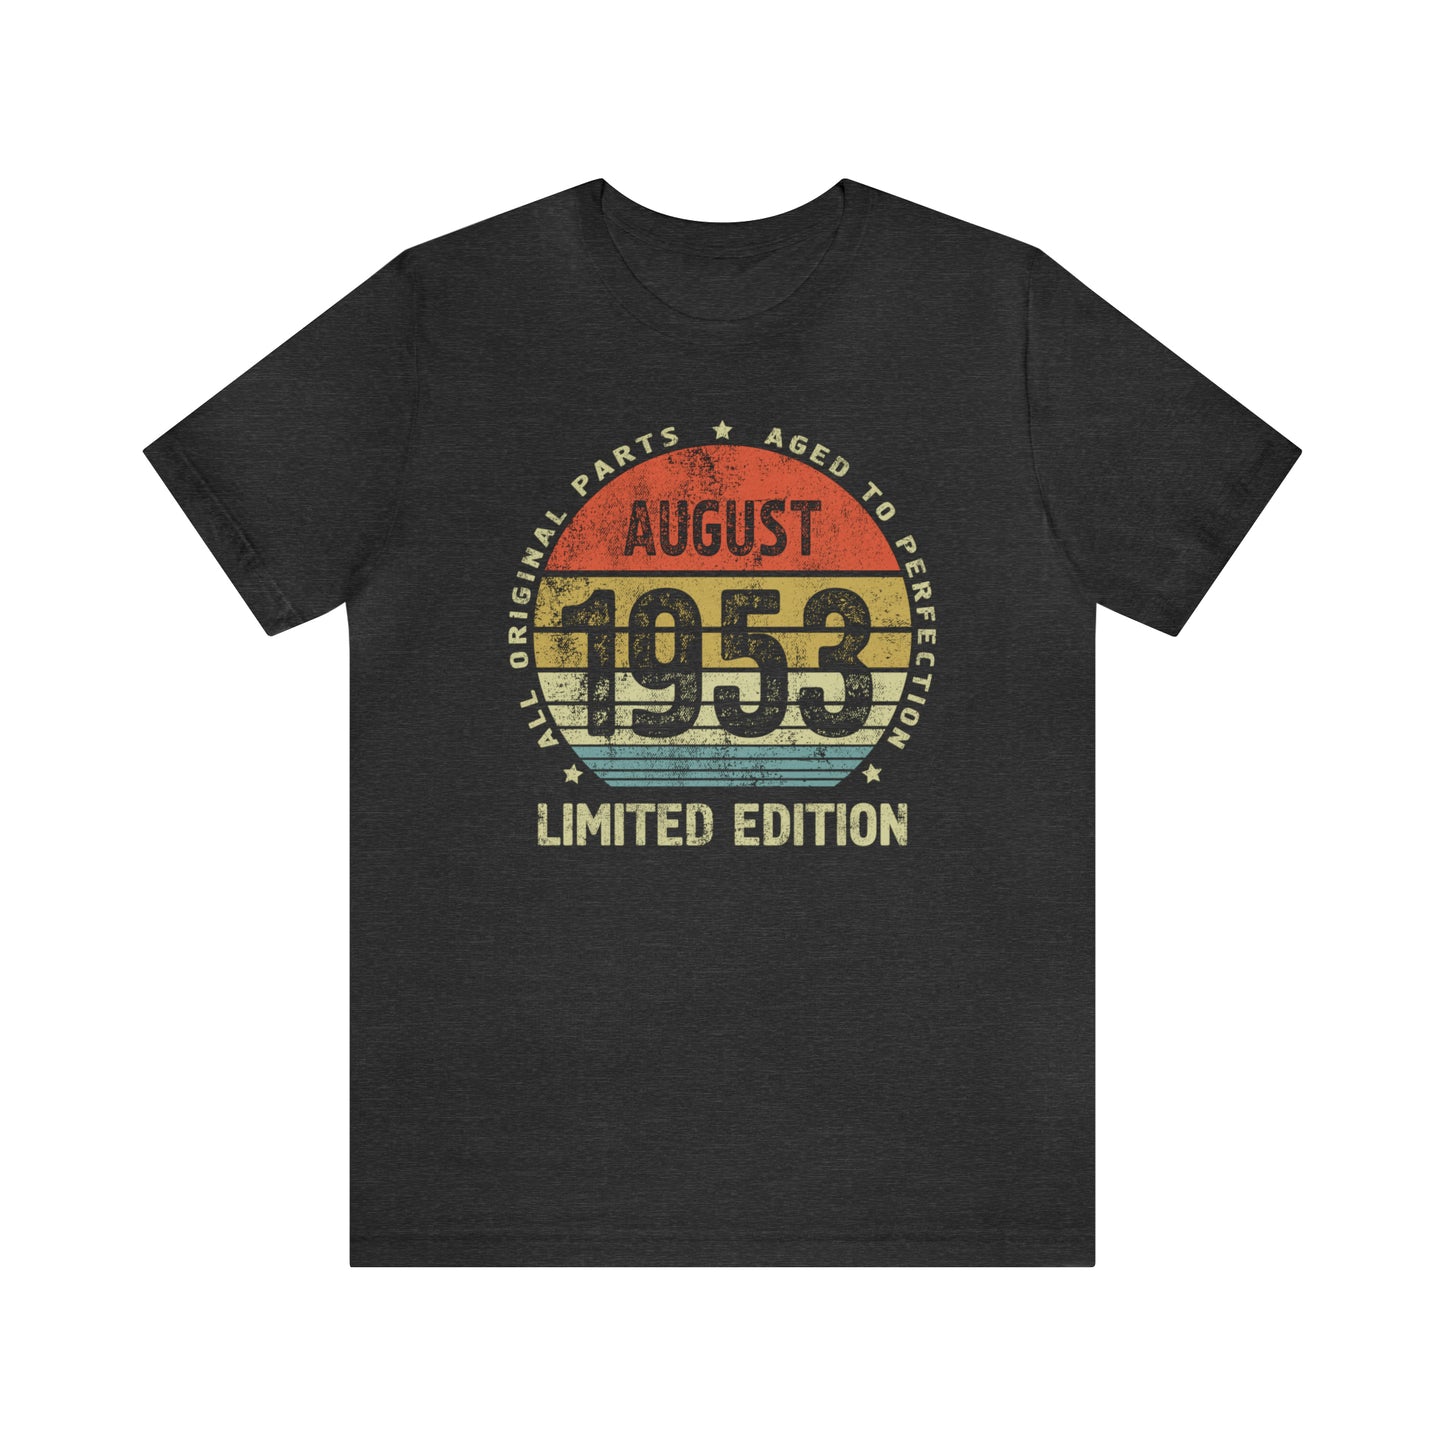 August 1953 birthday gift shirt for dad or mom, born in 1953 shirt for wife or husband